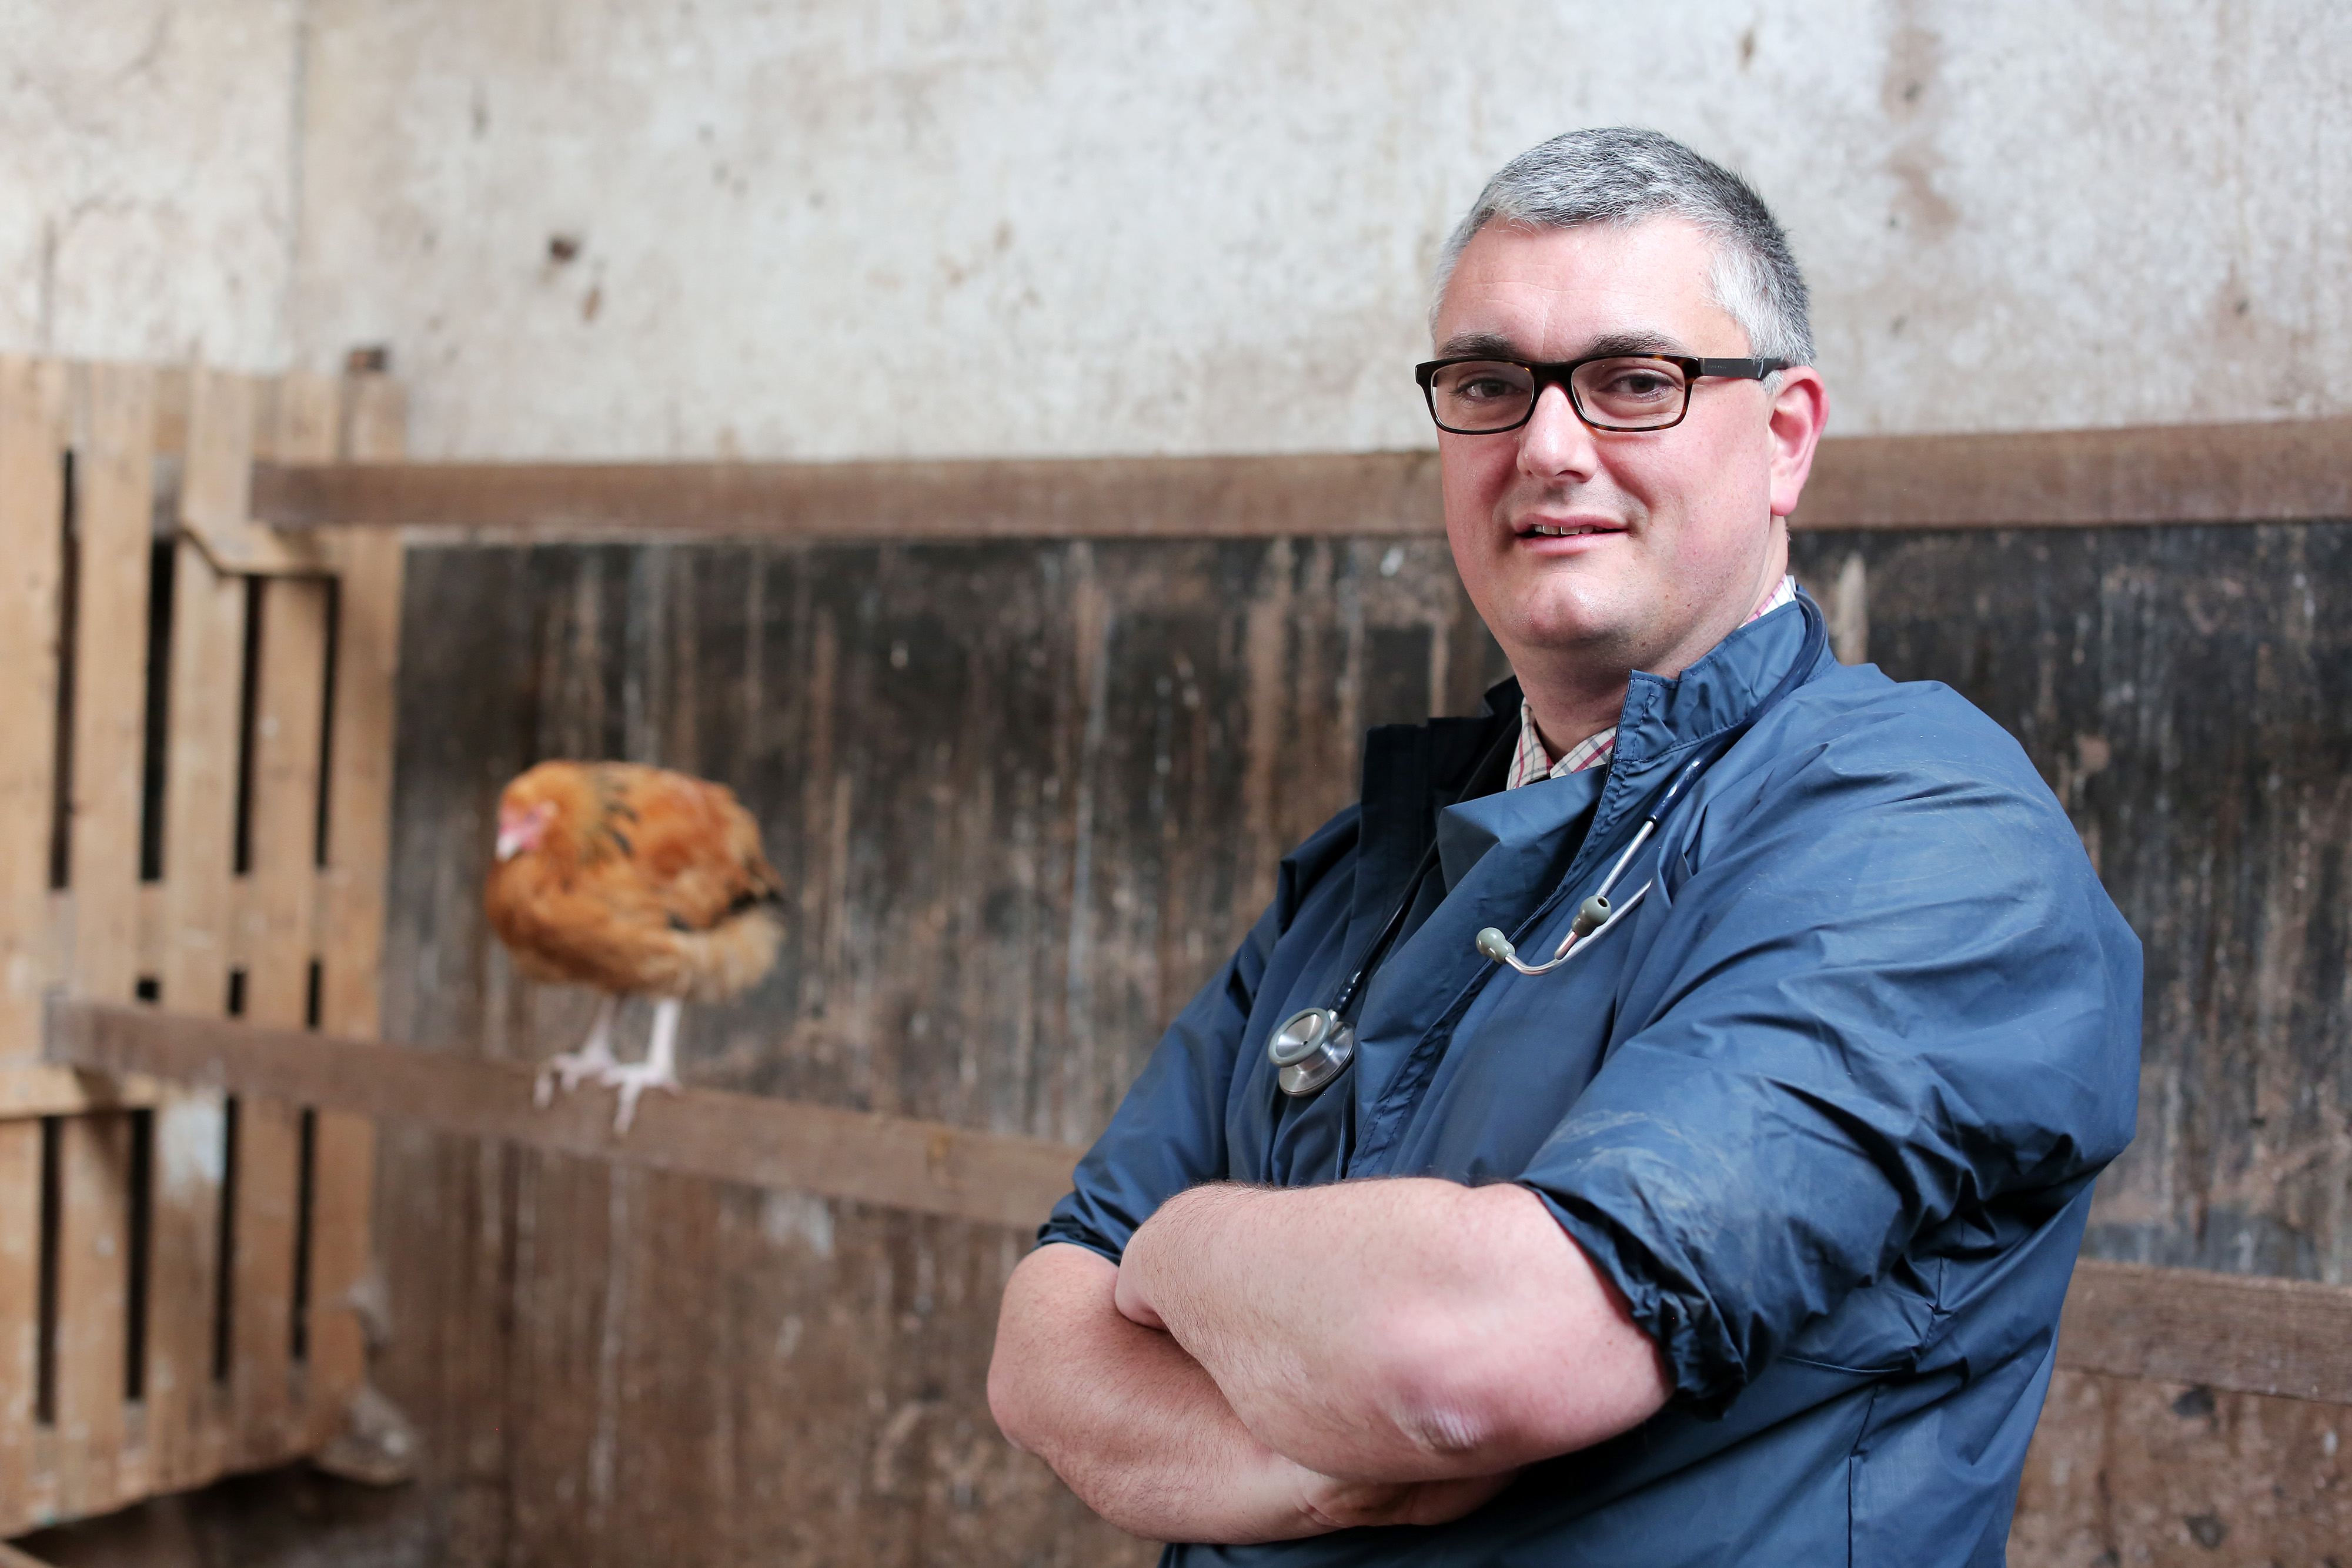 simon doherty president of bva stands with arms folded next to a chicken